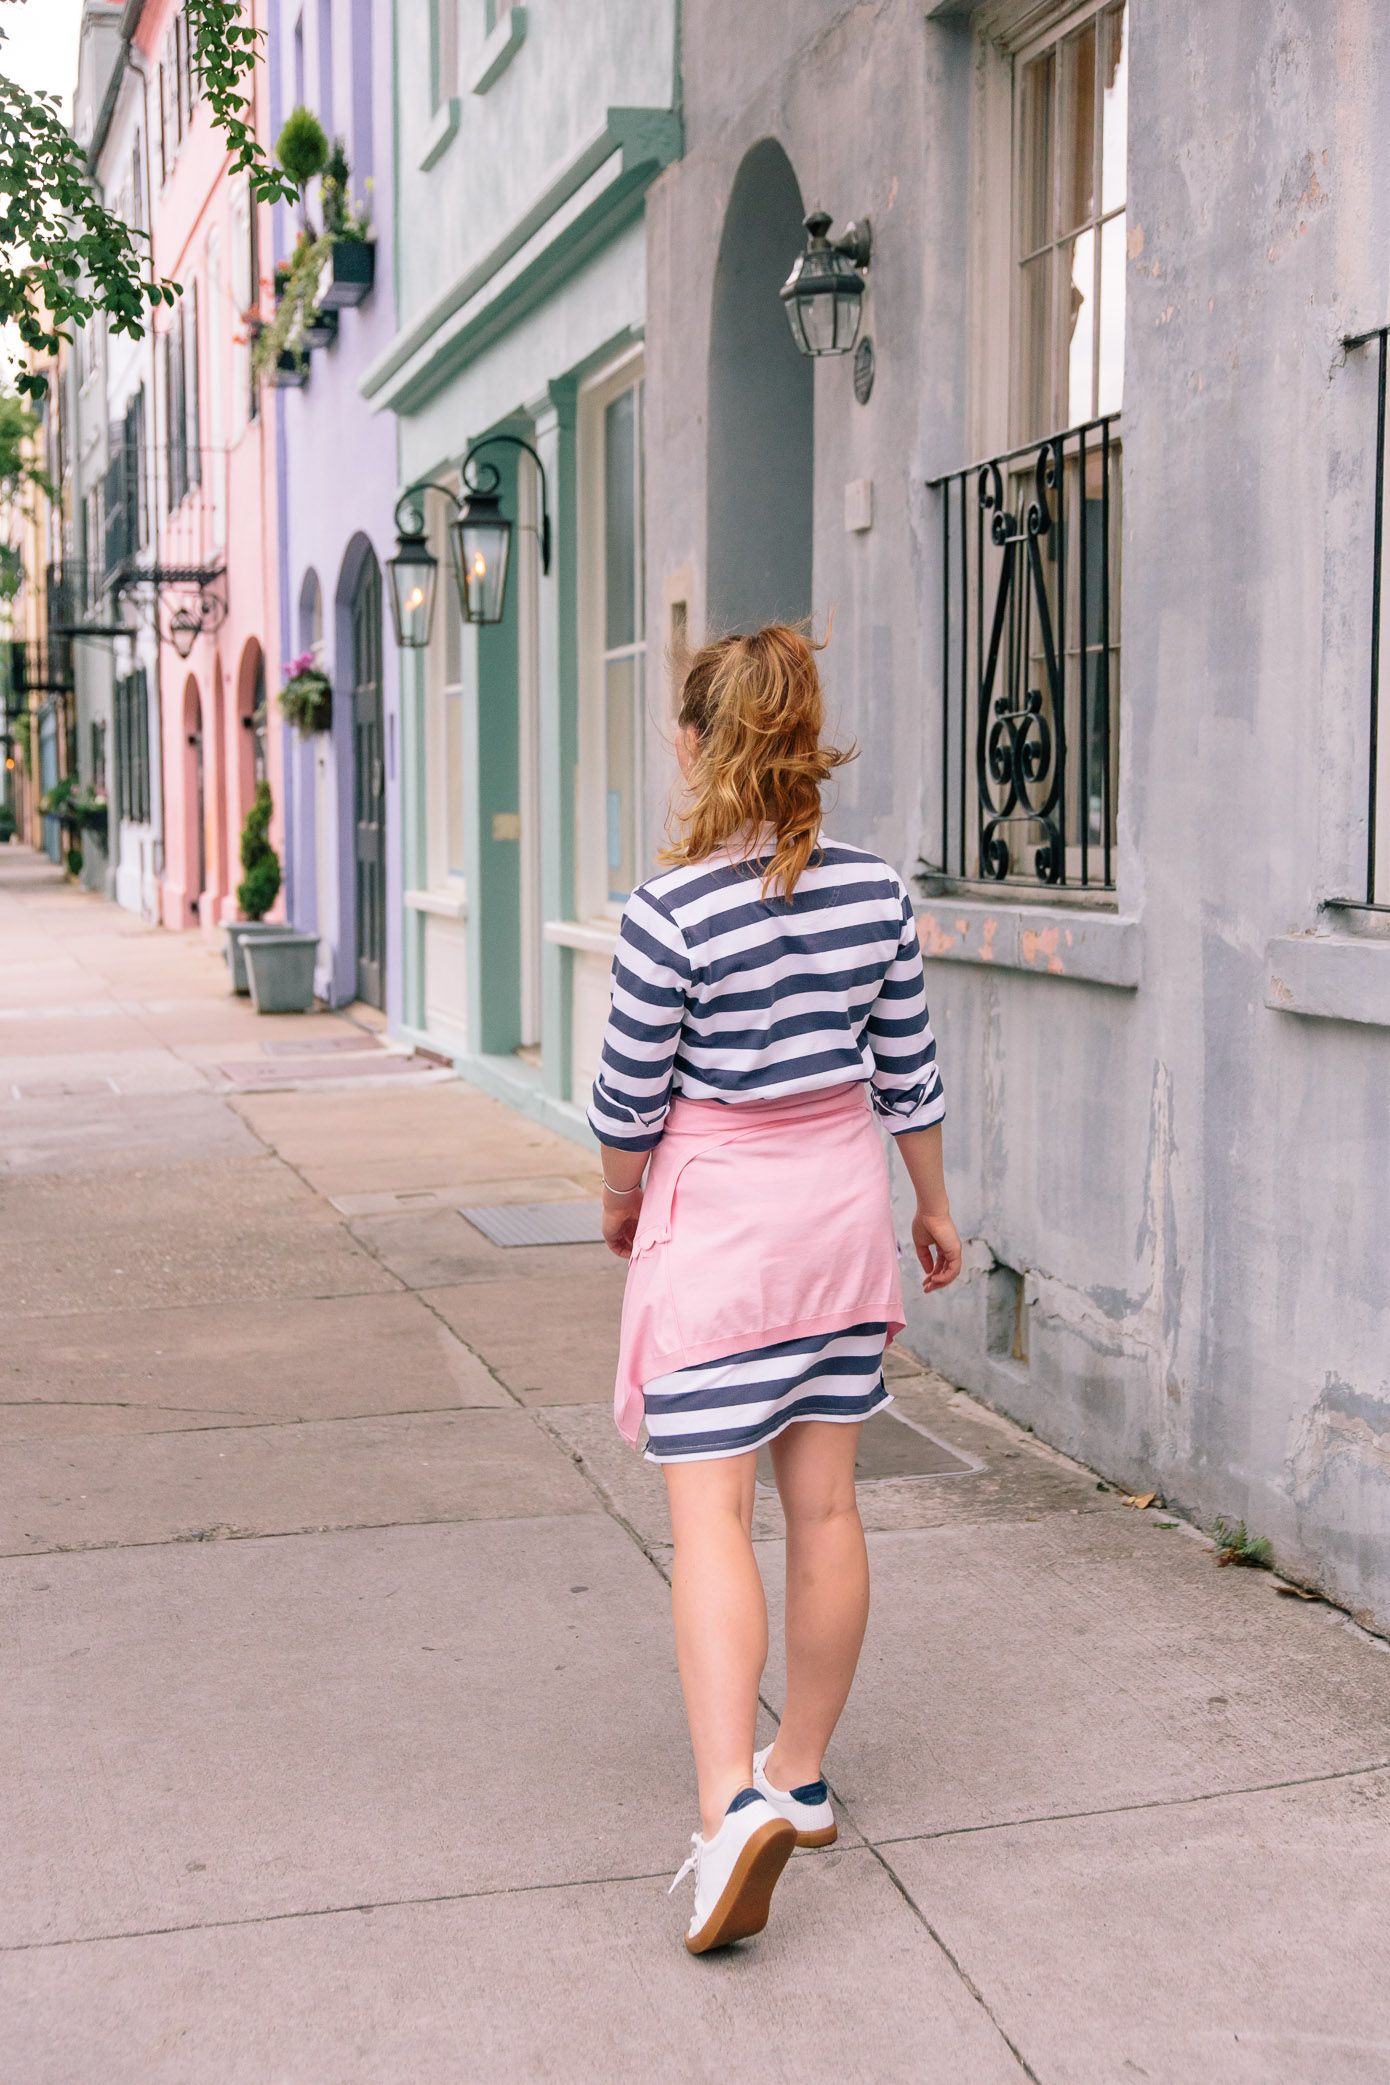 Striped Rugby Dress | Casual Spring to Summer Style | Louella Reese Life & Style Blog